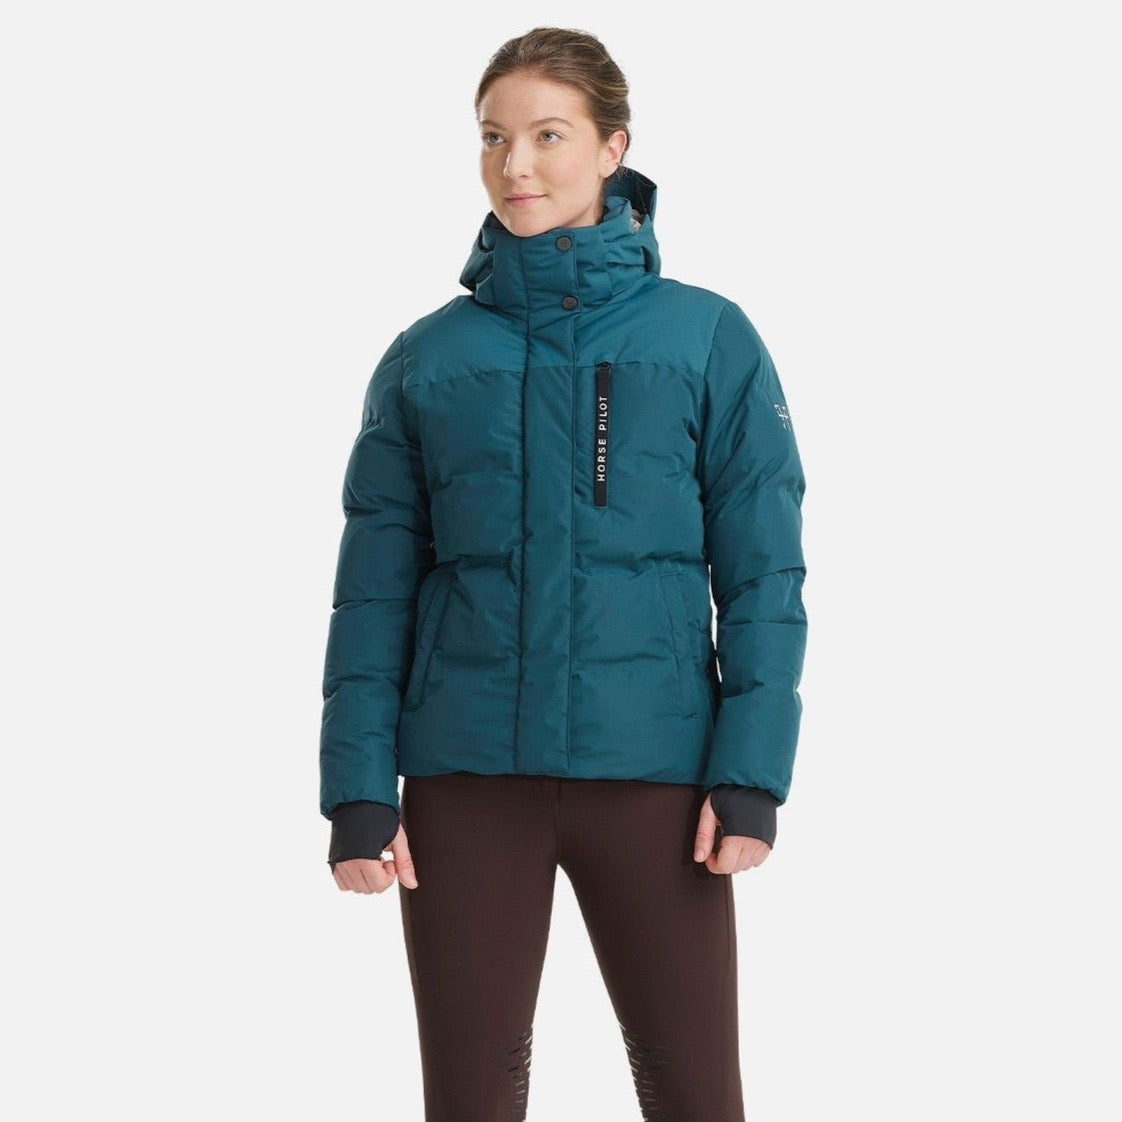 Women's Equestrian Clothing  EquiZone Online – tagged Winter